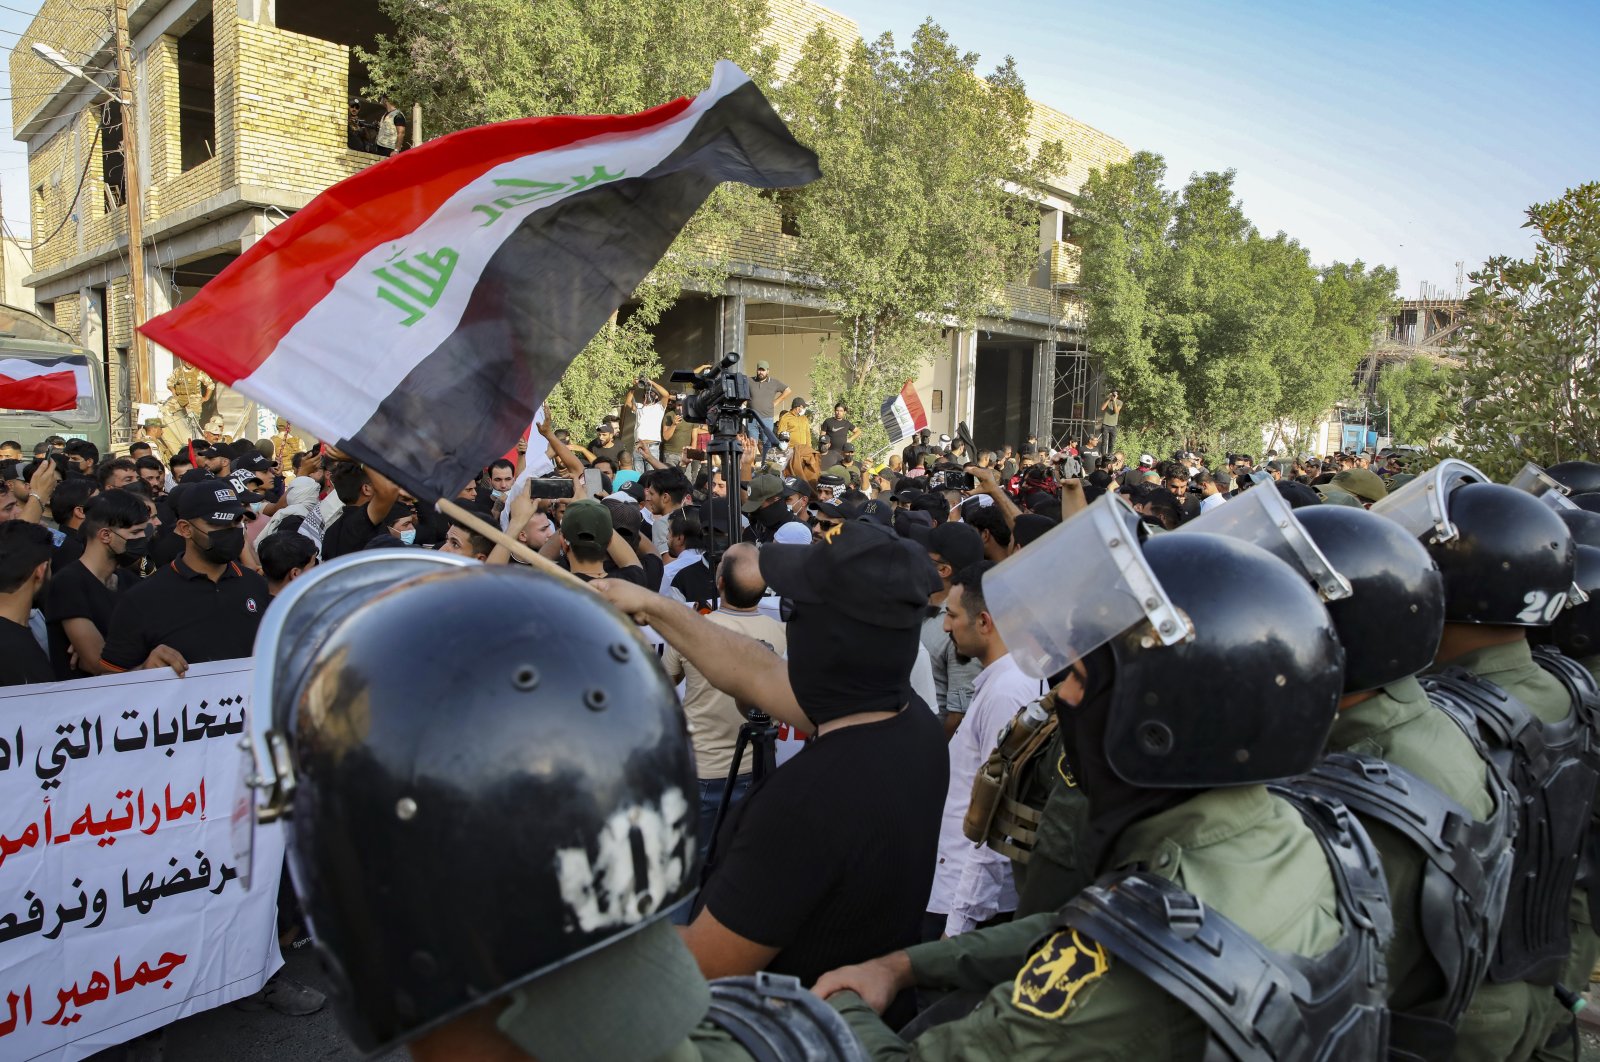 Security forces prevent protesters denouncing election results from storming the Electoral Commission building during a protest in Basra, Iraq, Oct. 19, 2021. (AP Photo)